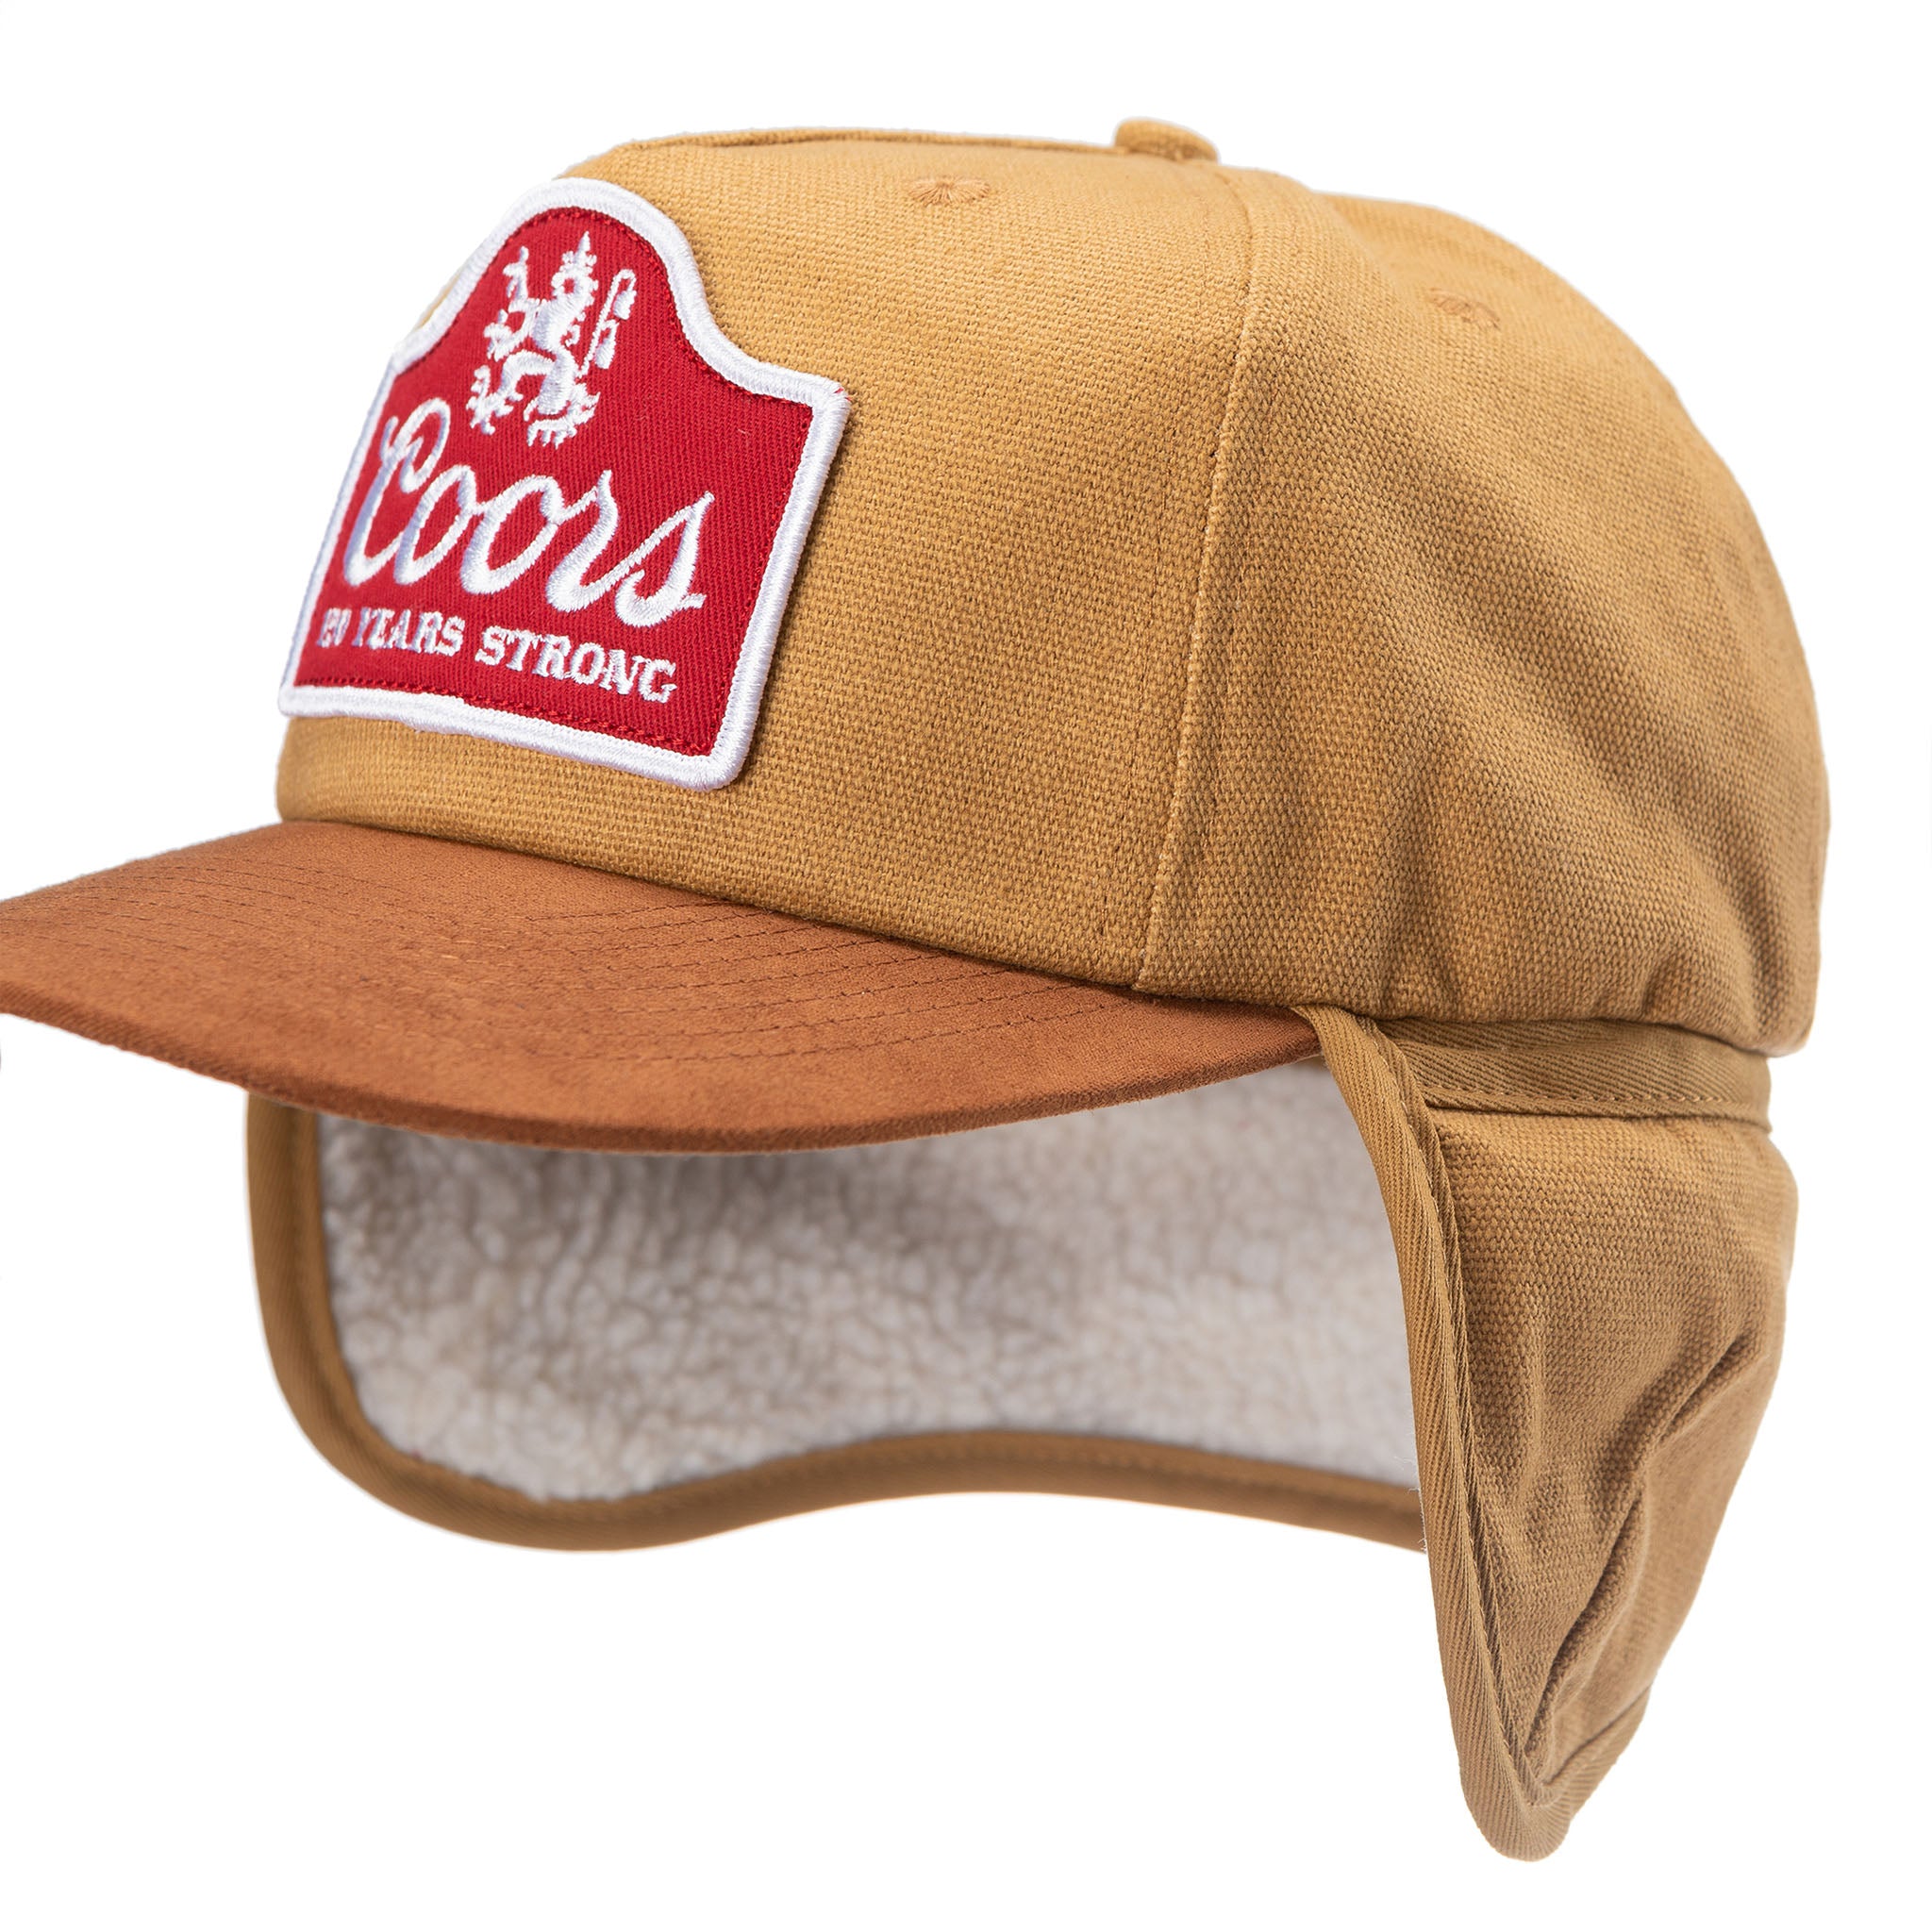 SEAGER X COORS BANQUET 150 CANVAS FLAPJACK COYOTE BROWN